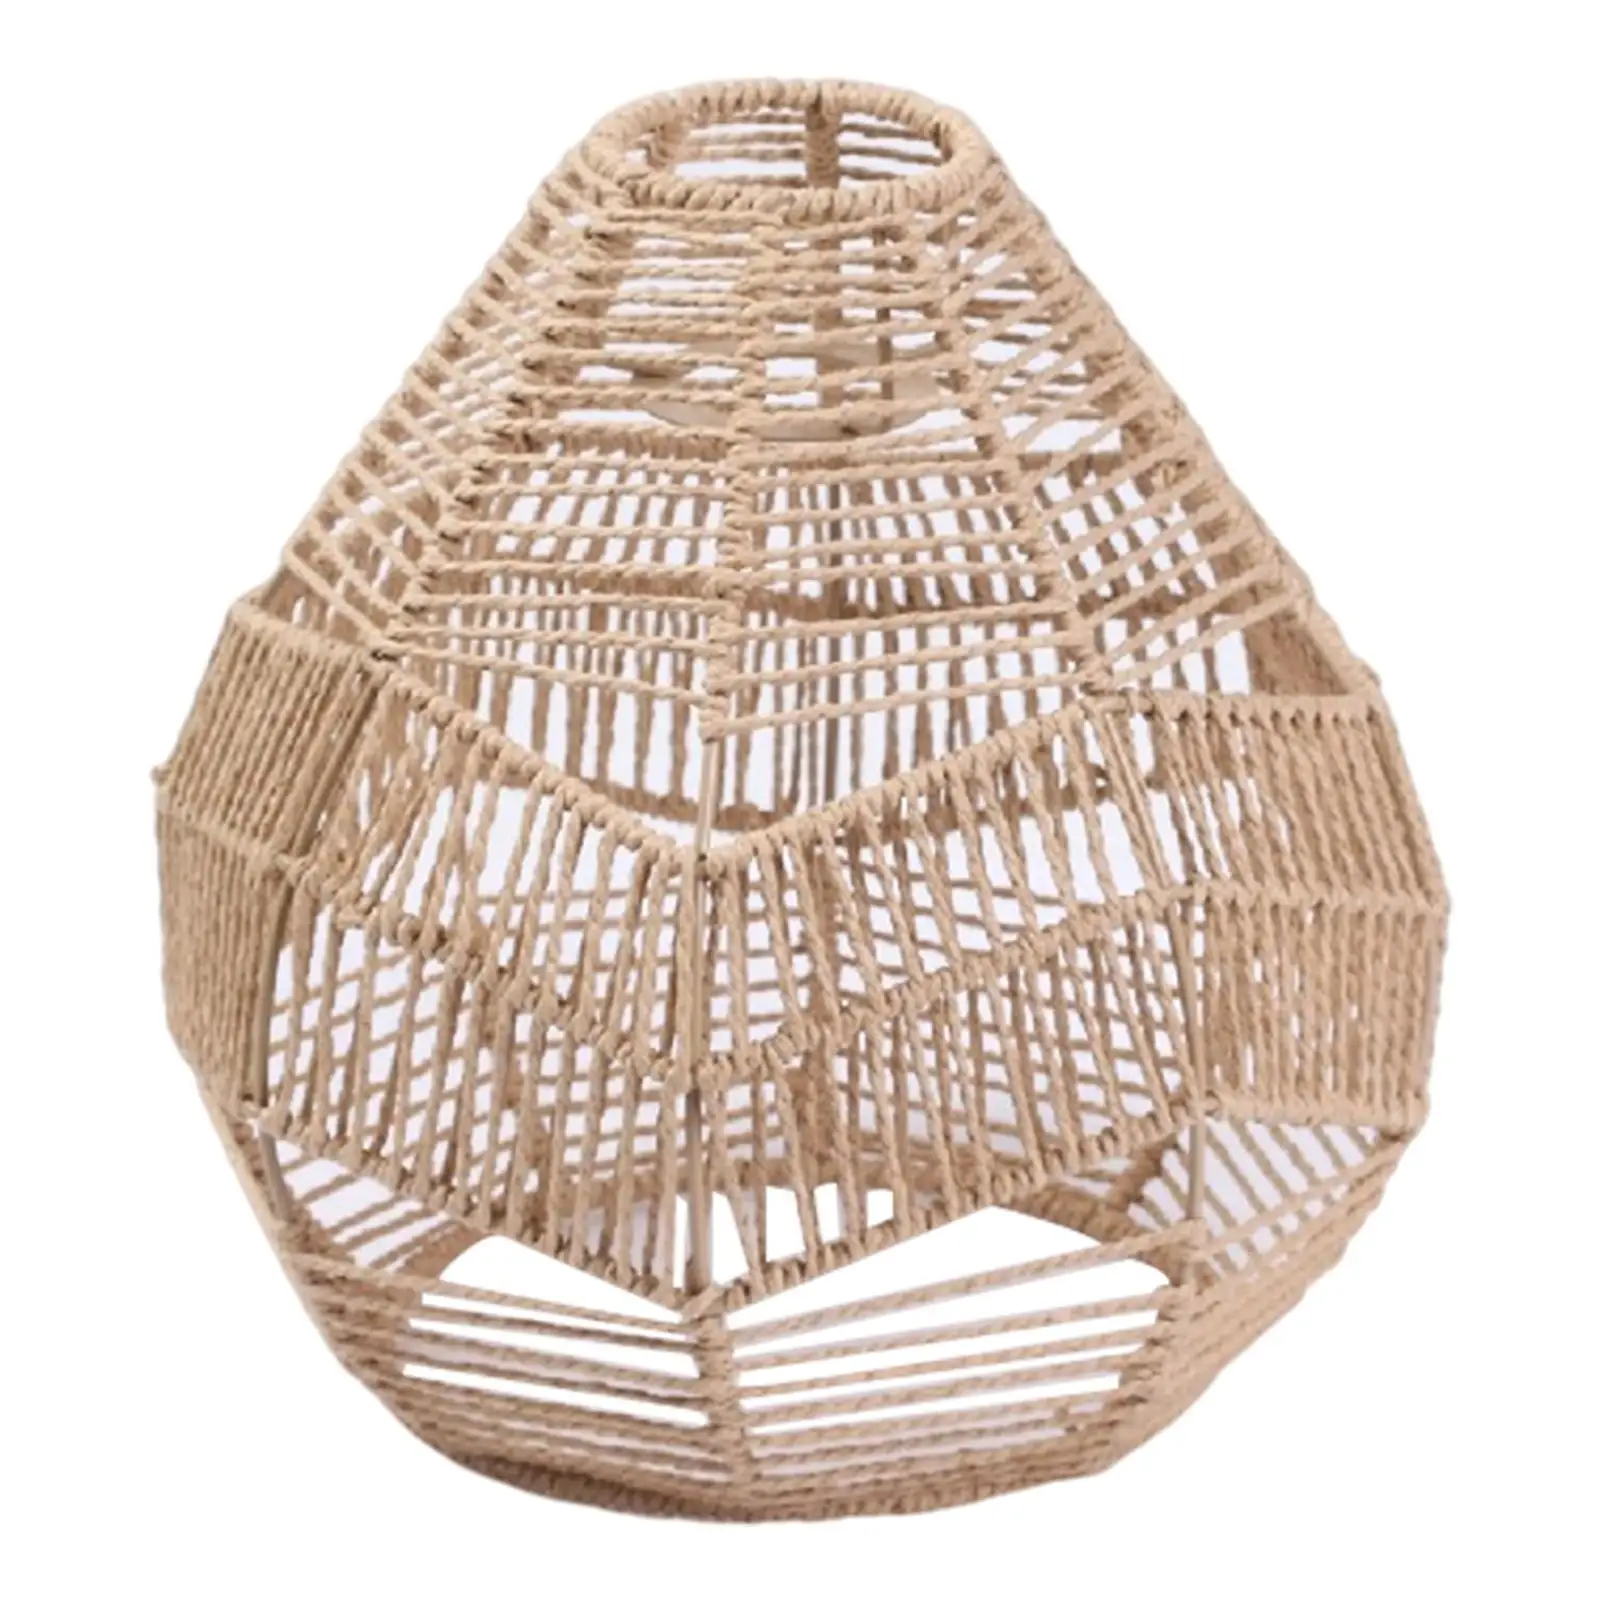 Handwoven Lamp Shade Hanging Light Fixture Cover Ceiling Light Shade for Dining Room Restaurant Living Room Decoration